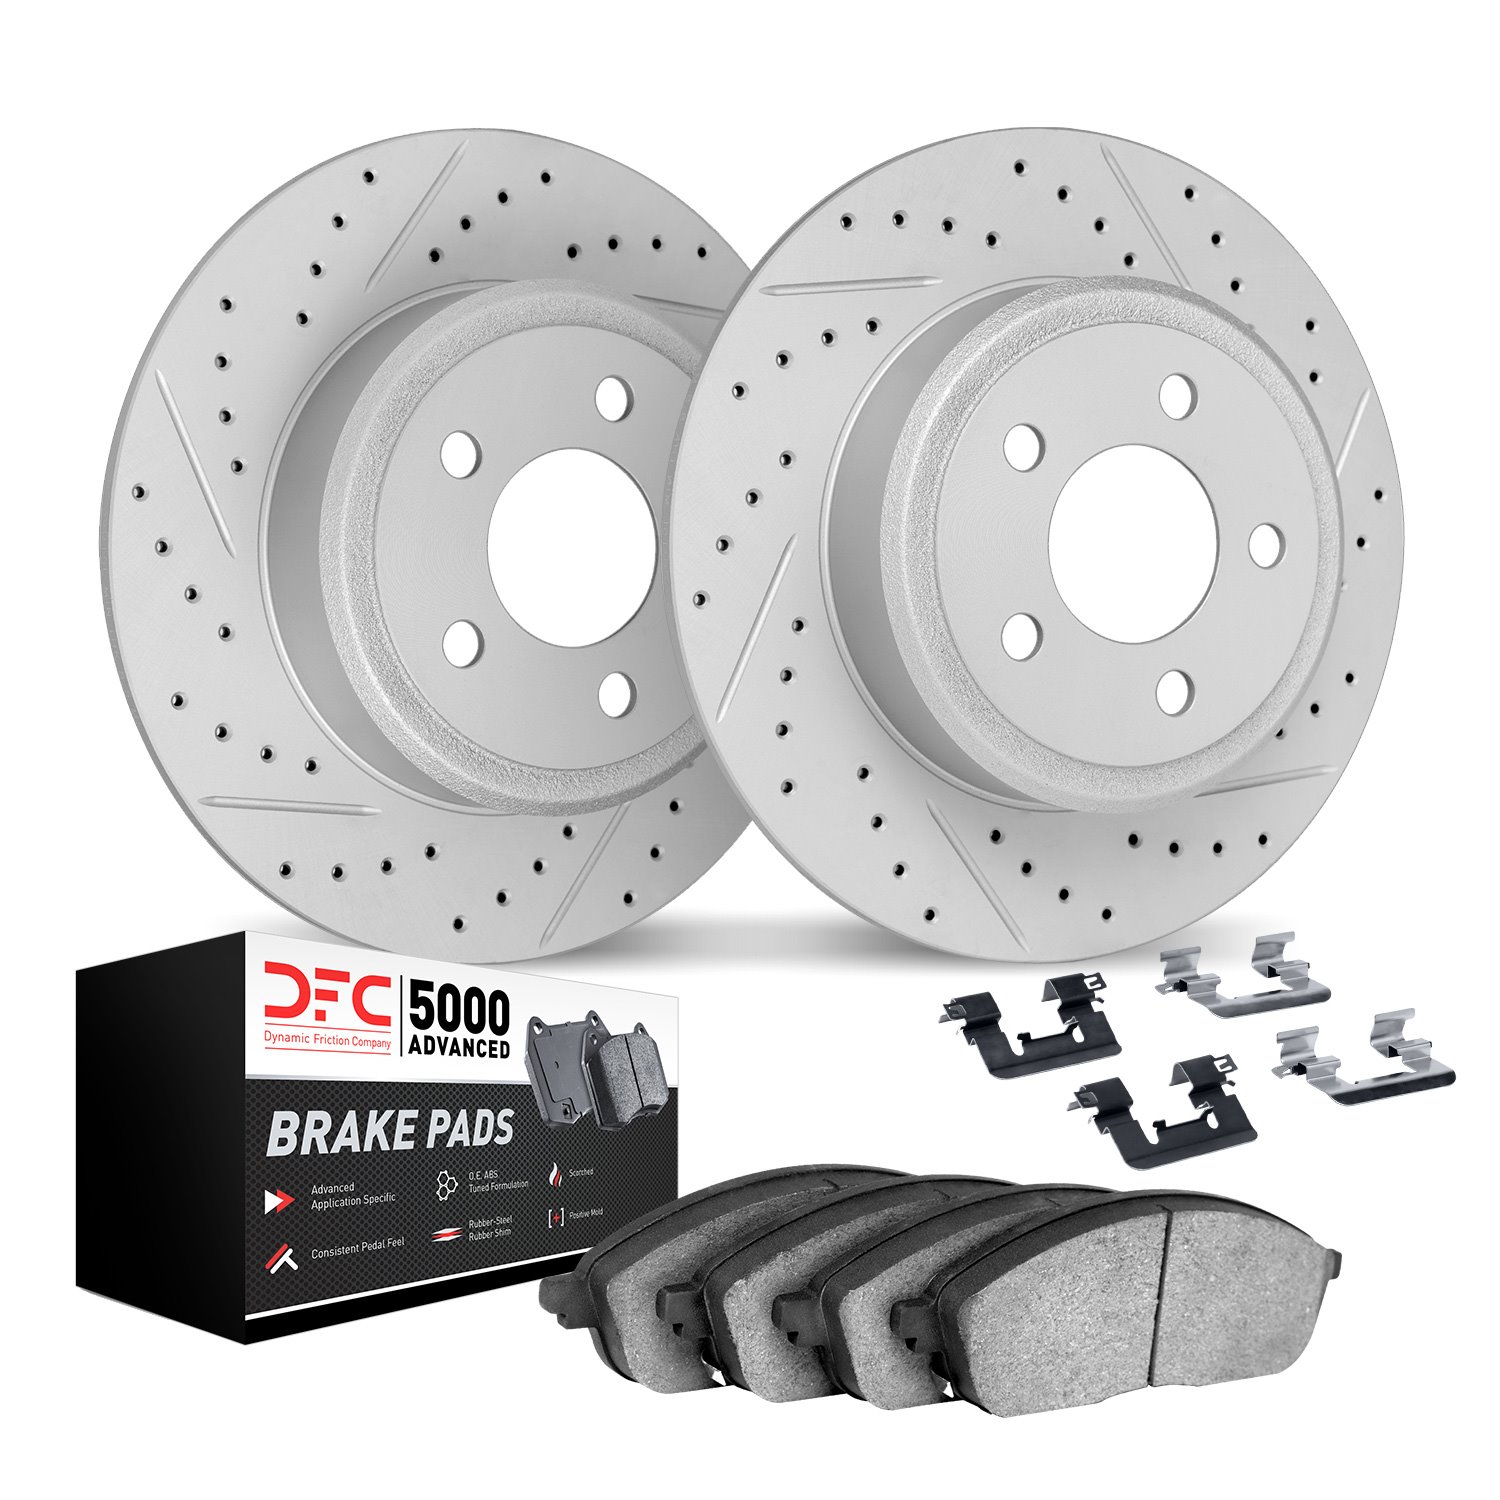 2512-59103 Geoperformance Drilled/Slotted Rotors w/5000 Advanced Brake Pads Kit & Hardware, Fits Select Acura/Honda, Position: R